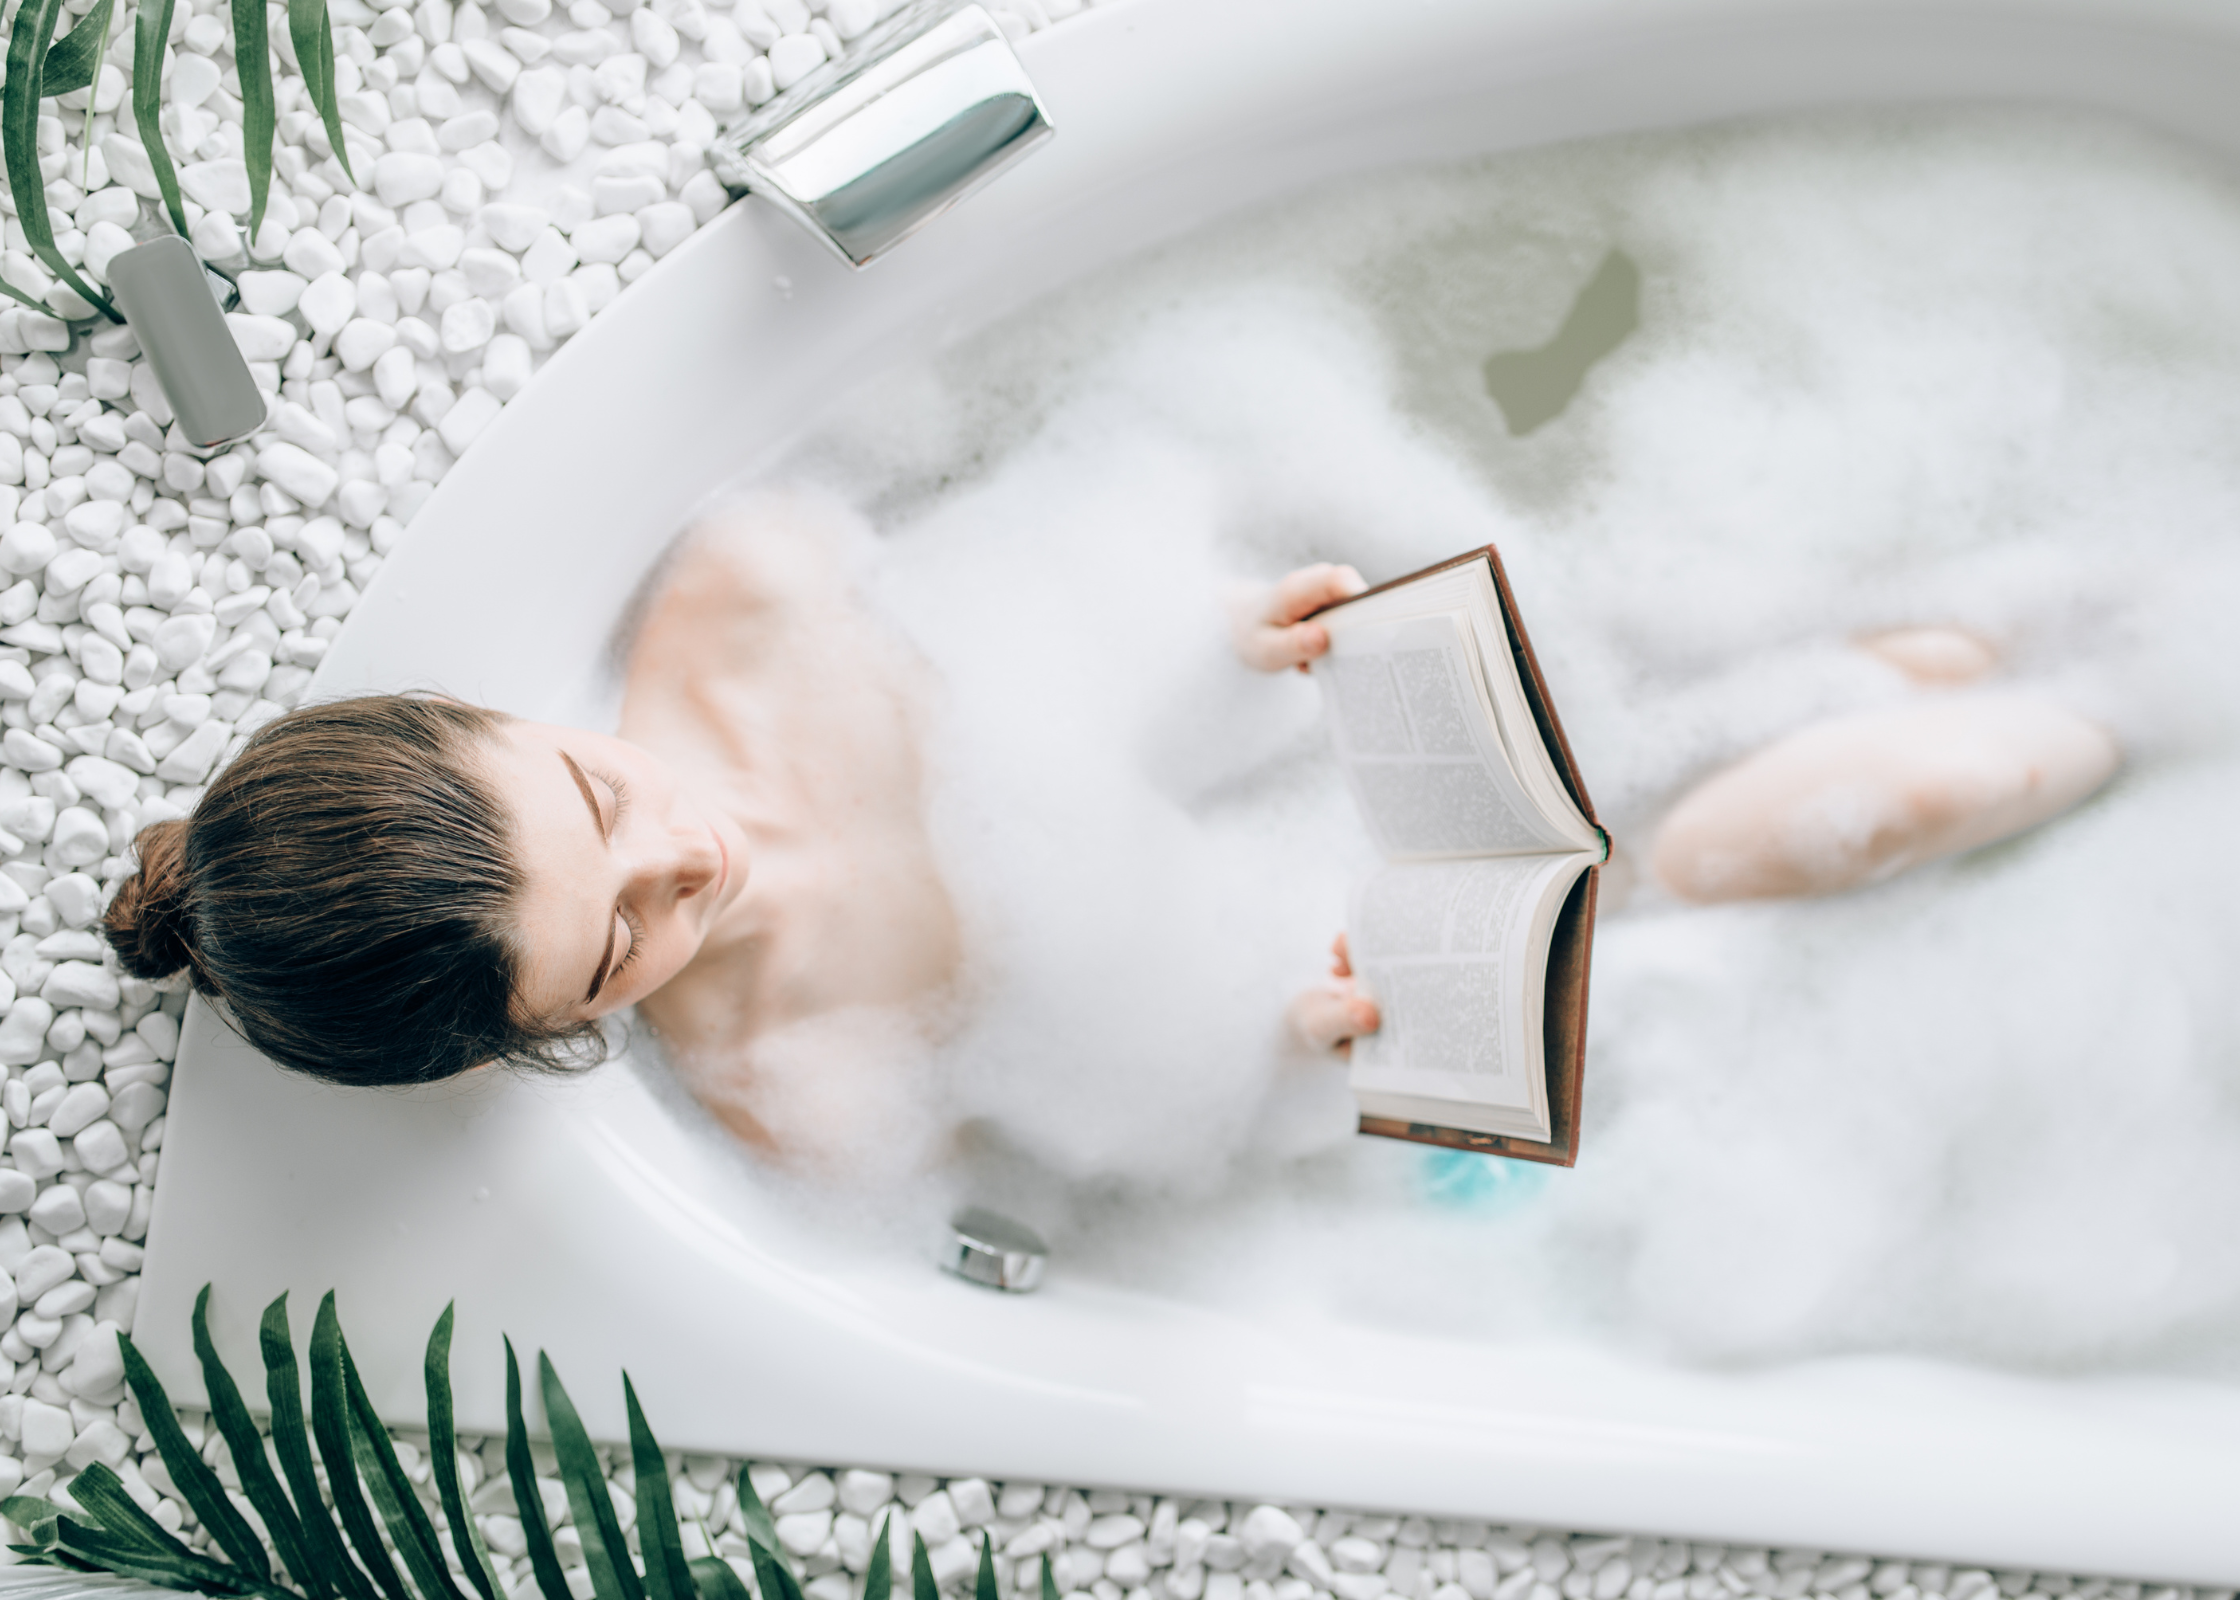 woman reading book in a bubble bath. how to glow up. glow up tips. how to glow up in a week. How to glow up overnight. how to get a glow up. how to have a glow up. glow ups. how to be beautiful. fast and instant glowing up tips